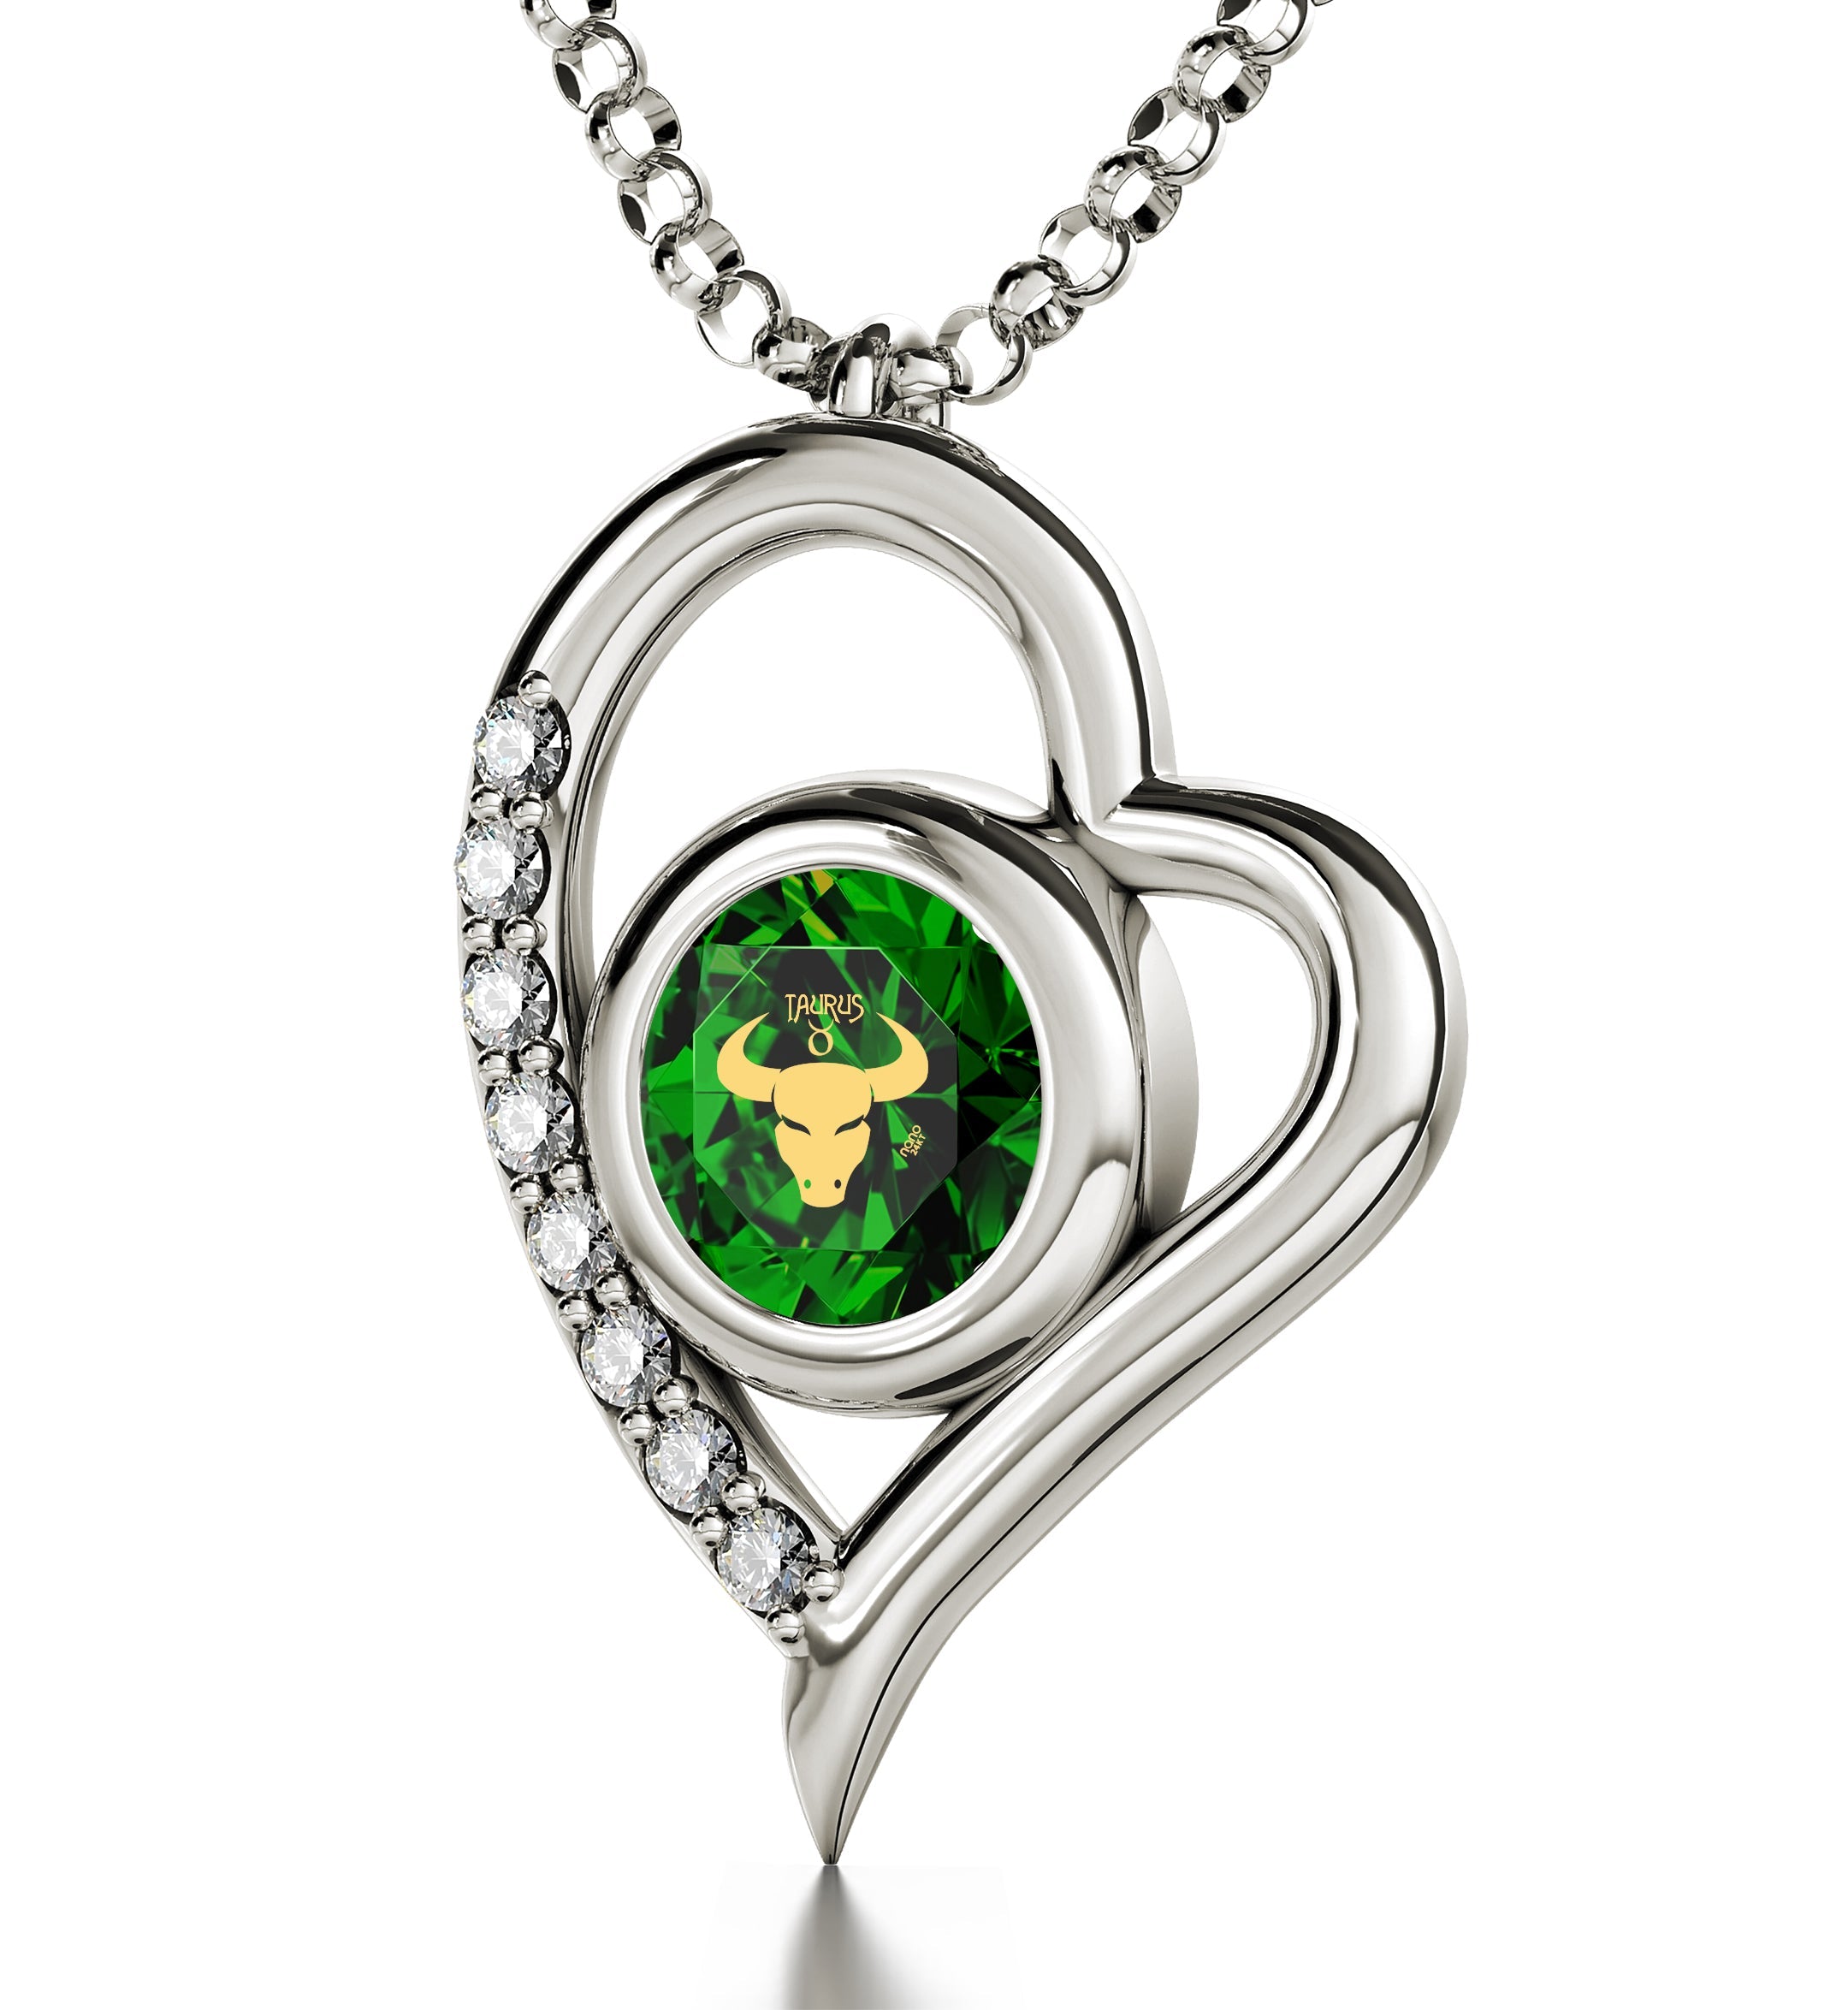 Close-up of a 925 Sterling Silver Taurus Necklace Zodiac Heart Pendant 24k Gold Inscribed on Crystal depicted in gold on a green geometric background, set in a silver ring encrusted with diamonds and featuring Taurus zodiac jewelry elements.